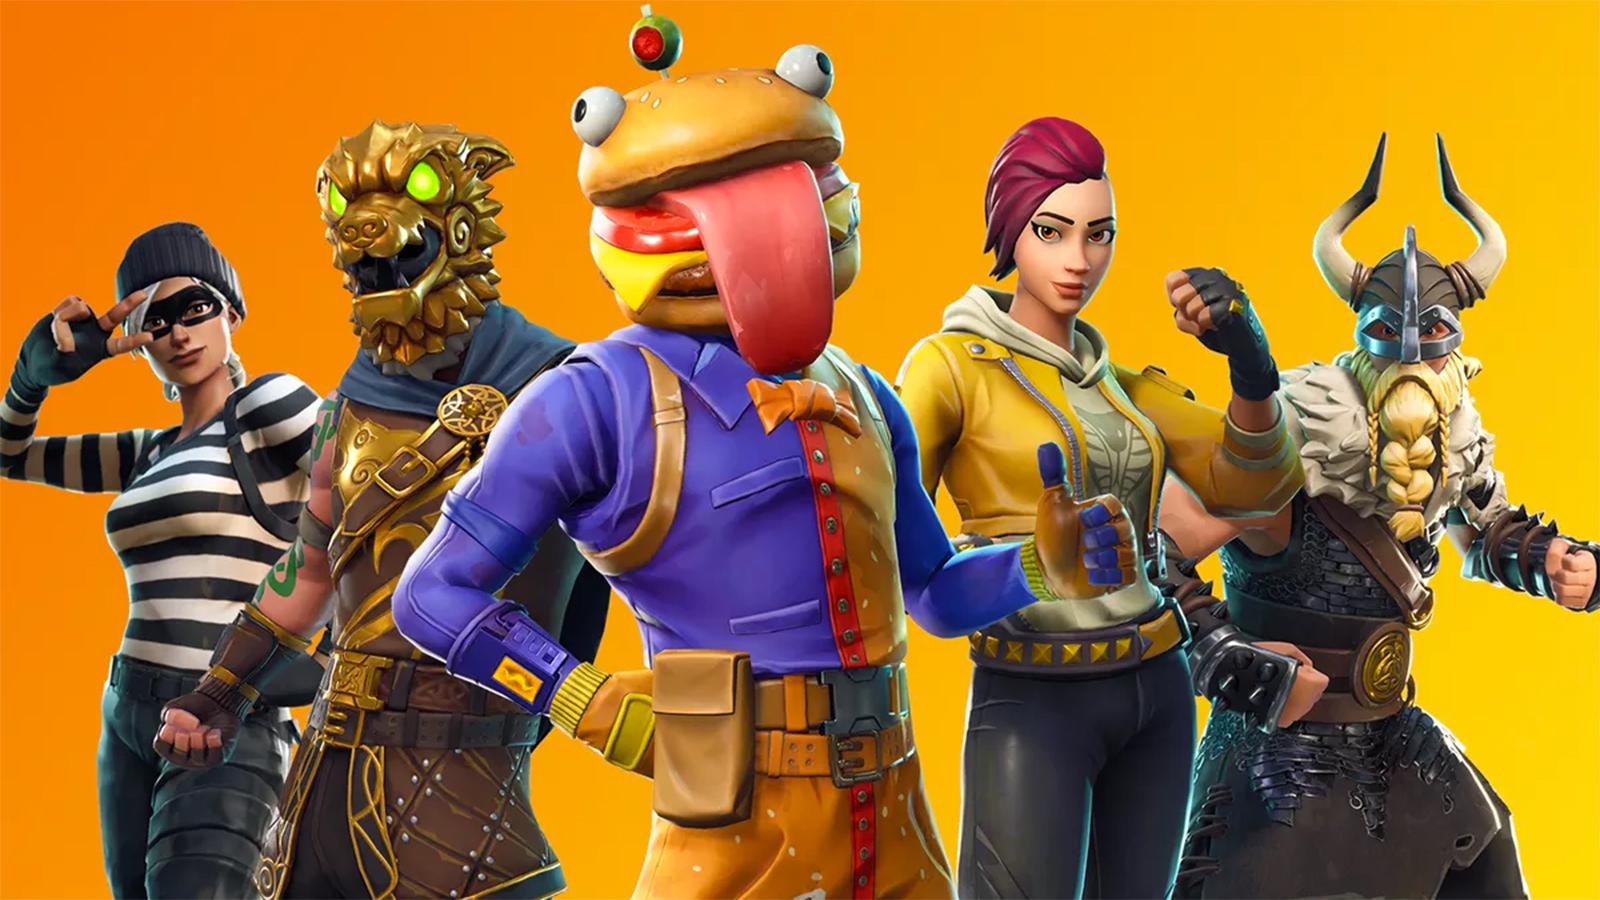 Fortnite fans think its major new character is secretly being